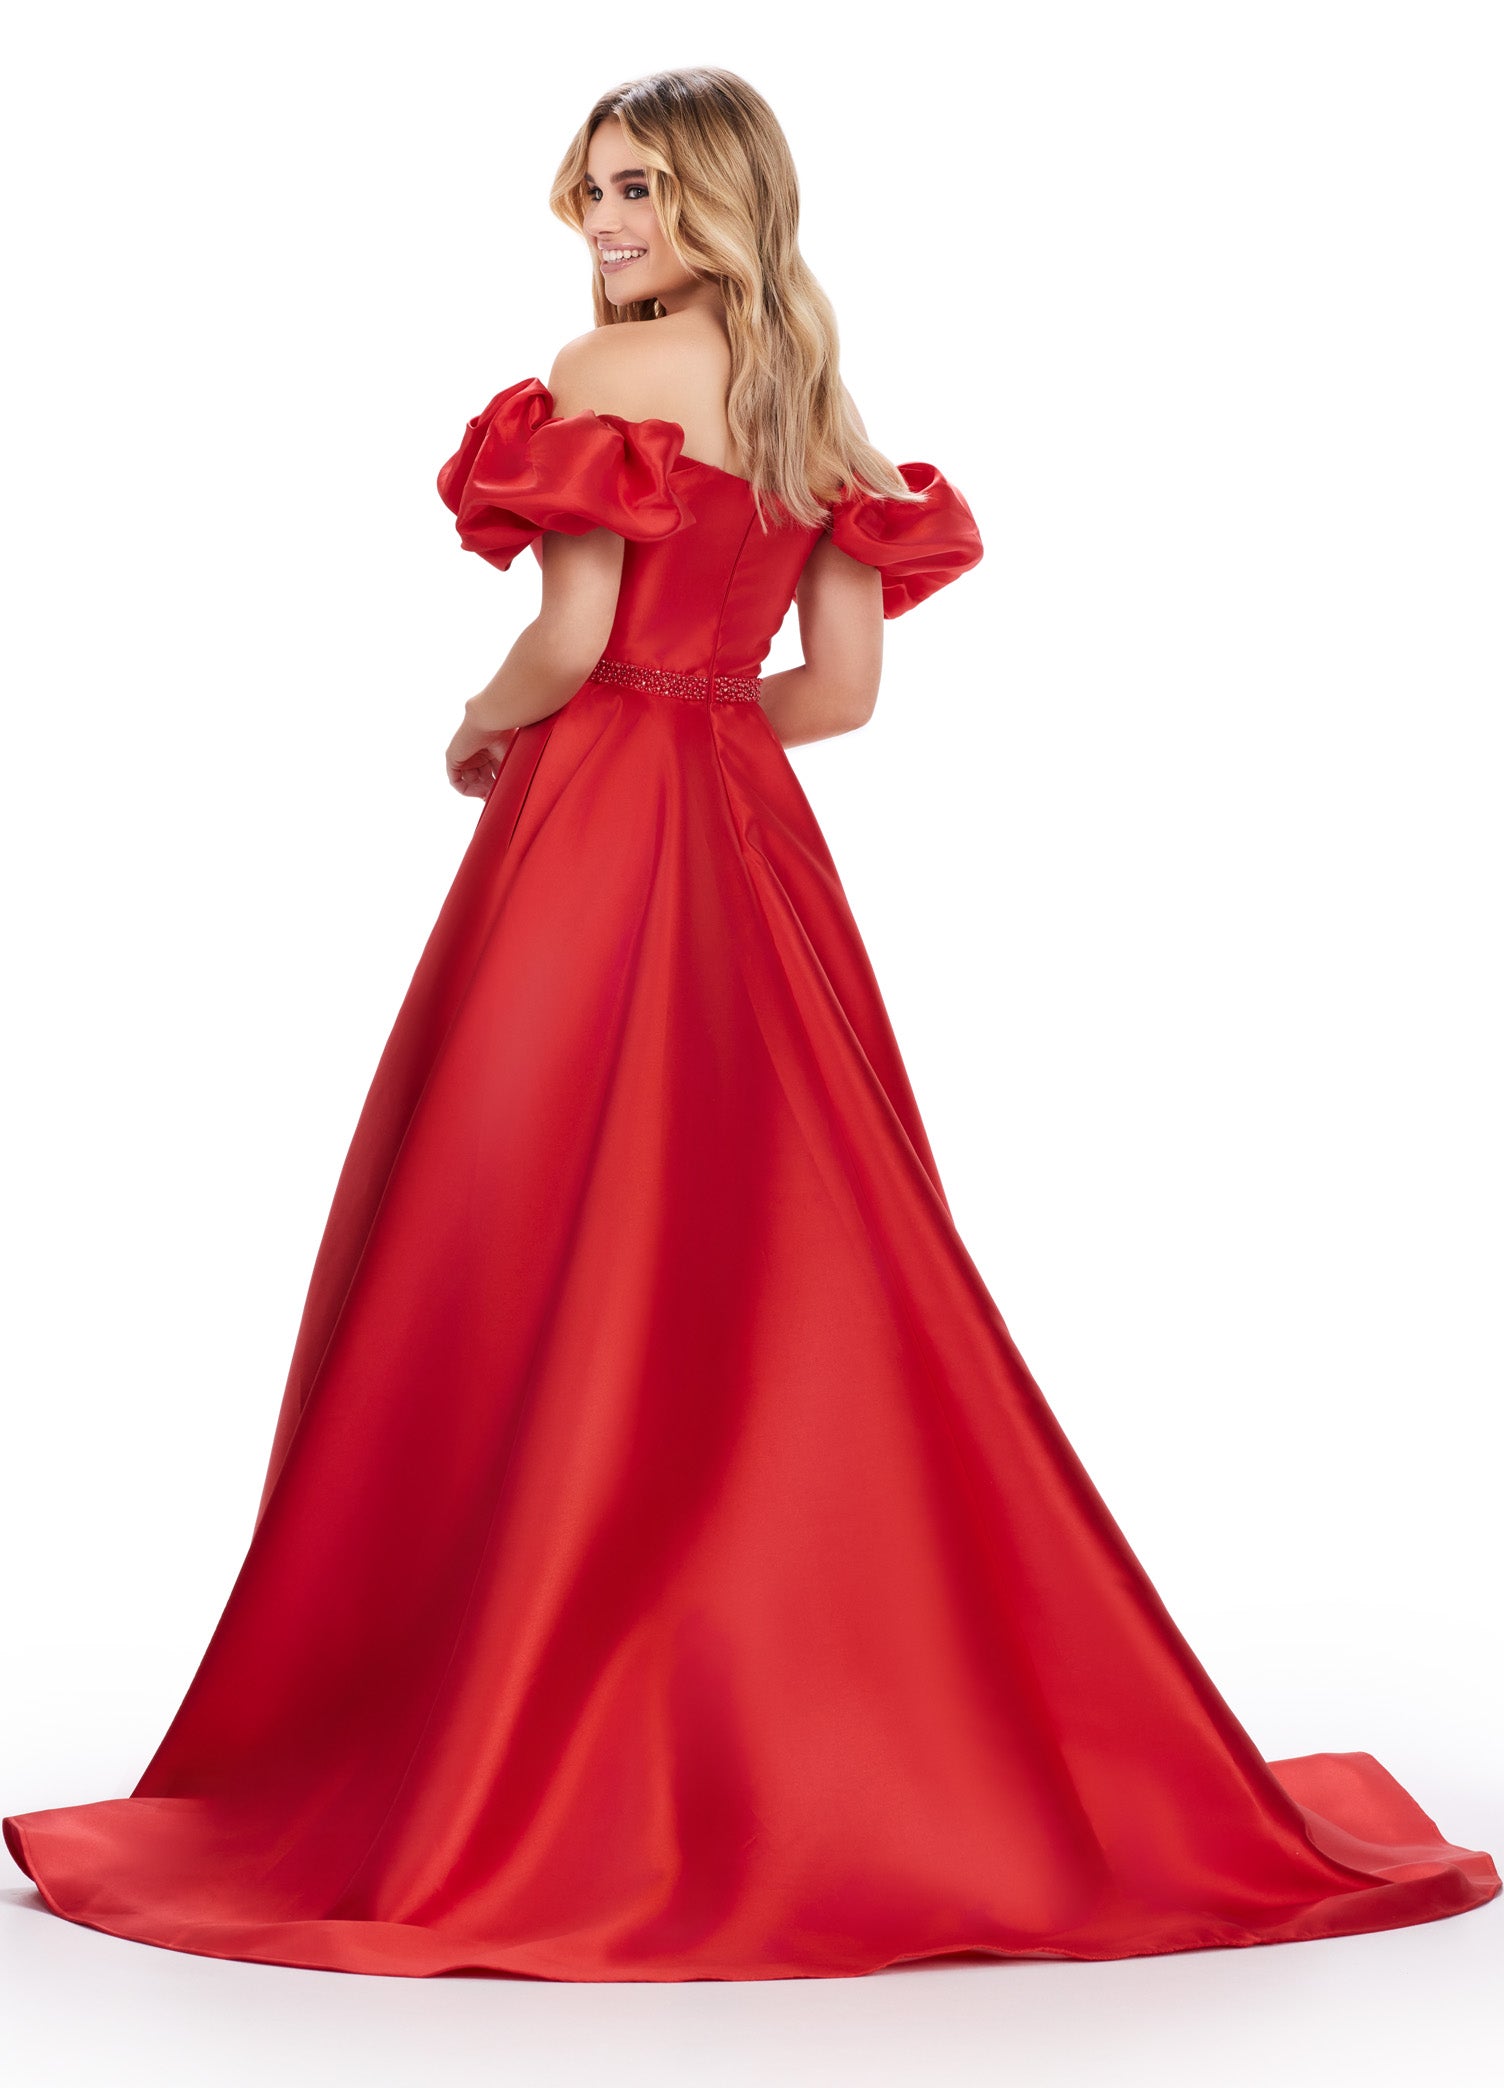 Elevate your prom night look with the Ashley Lauren 11542 long prom dress. Featuring an off-shoulder neckline and a gorgeous ball gown silhouette, this formal pageant gown is crafted from Mikado fabric for a luxurious feel. The puff sleeves add a playful touch, making you stand out from the crowd. Off the shoulder Mikado ball gown with puff sleeve details. The look is complete with a beaded waistline.